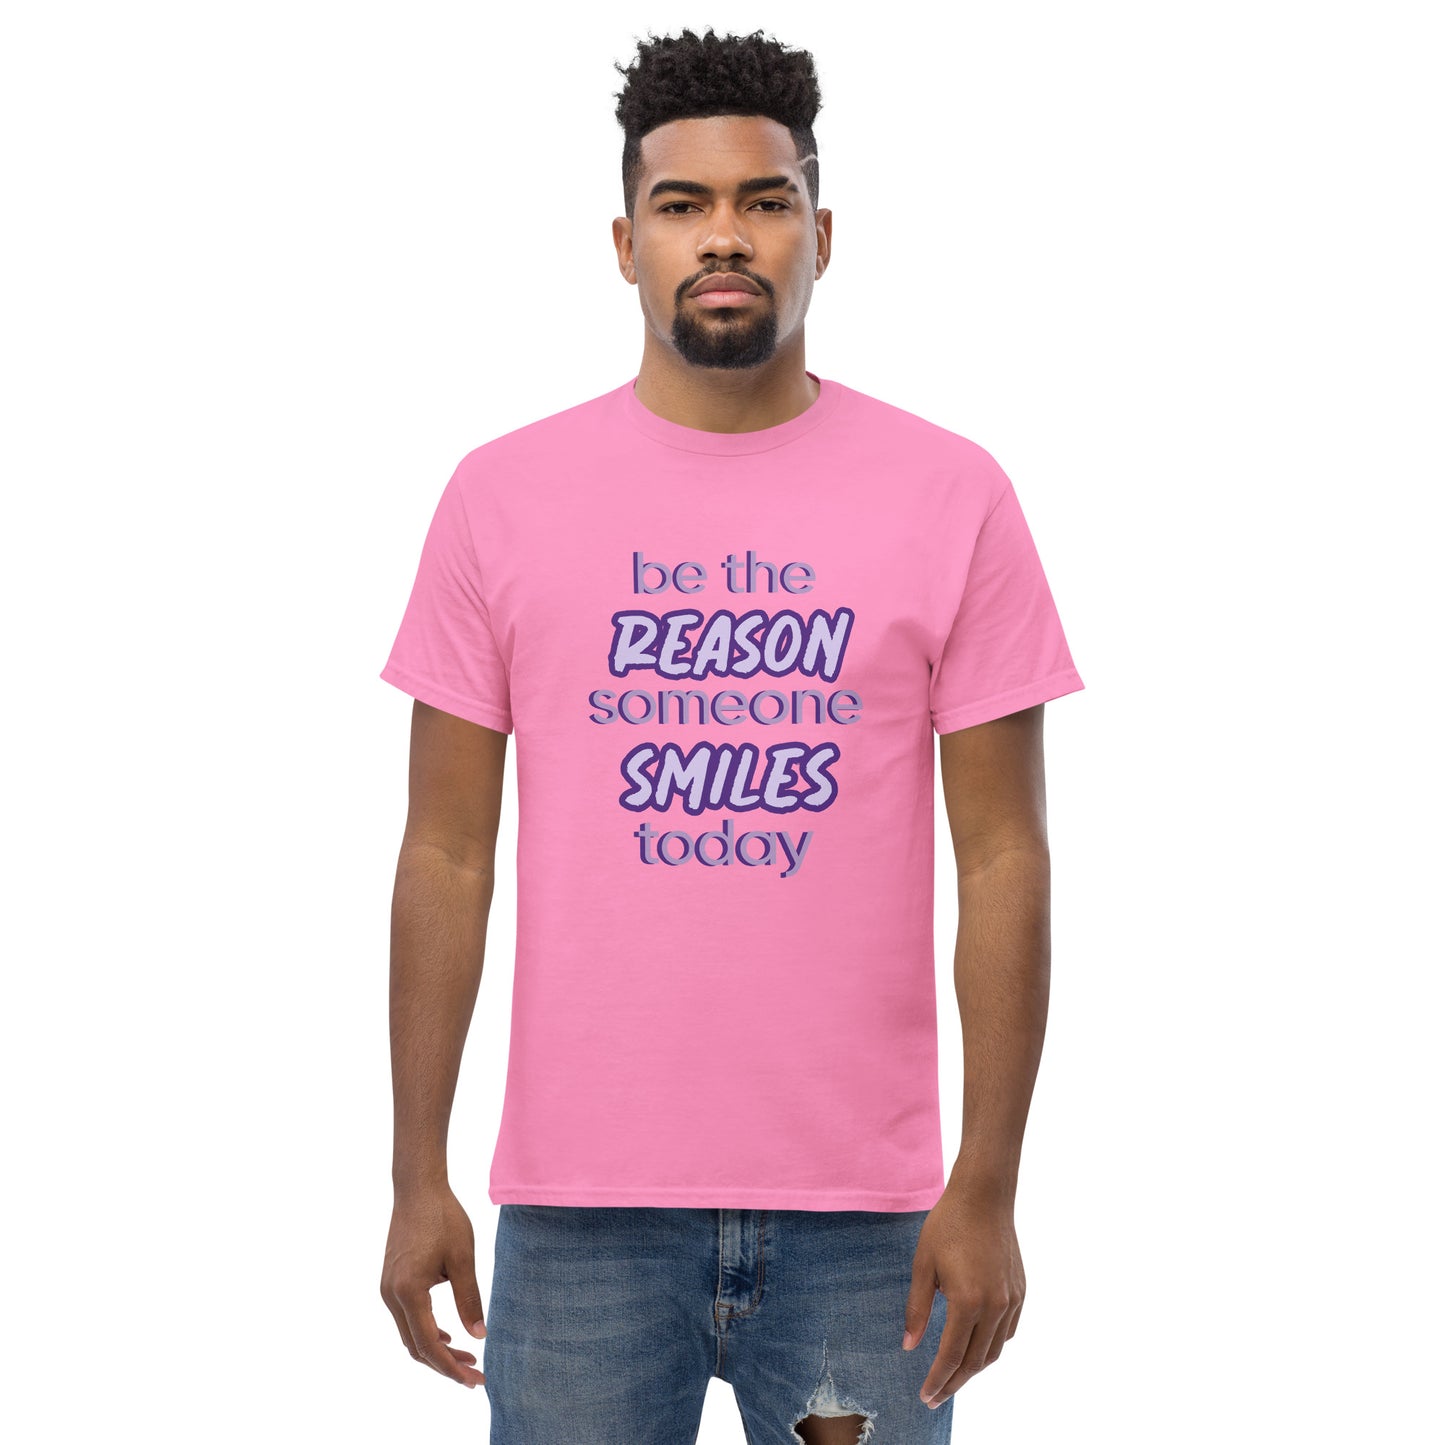 Men with azalea T-shirt and the quote "be the reason someone smiles today" in purple on it. 